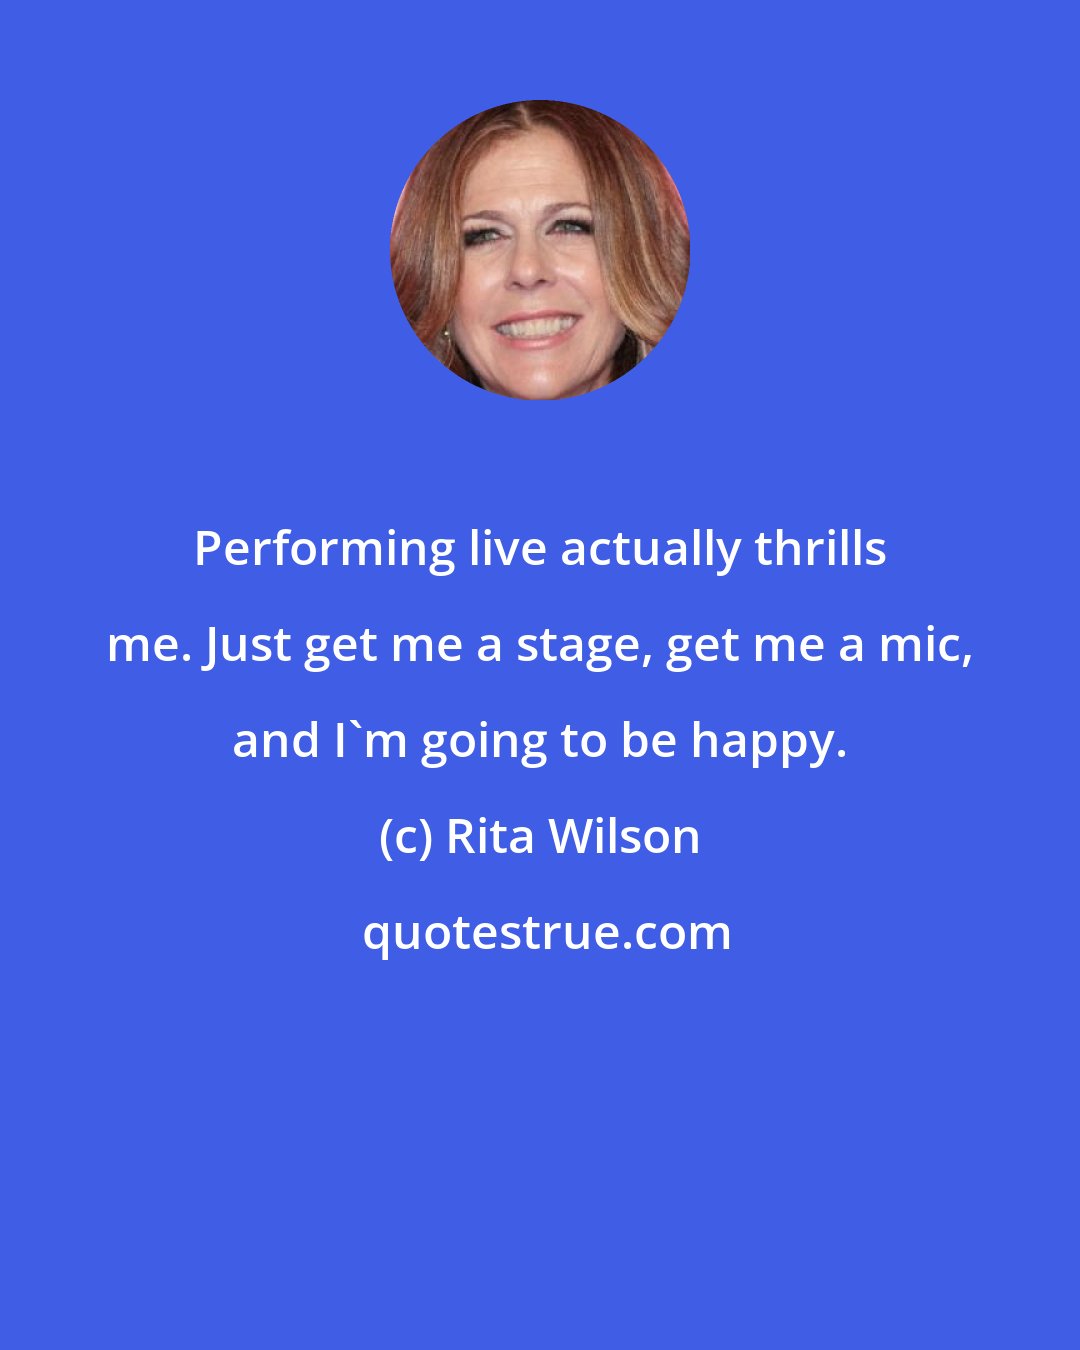 Rita Wilson: Performing live actually thrills me. Just get me a stage, get me a mic, and I'm going to be happy.